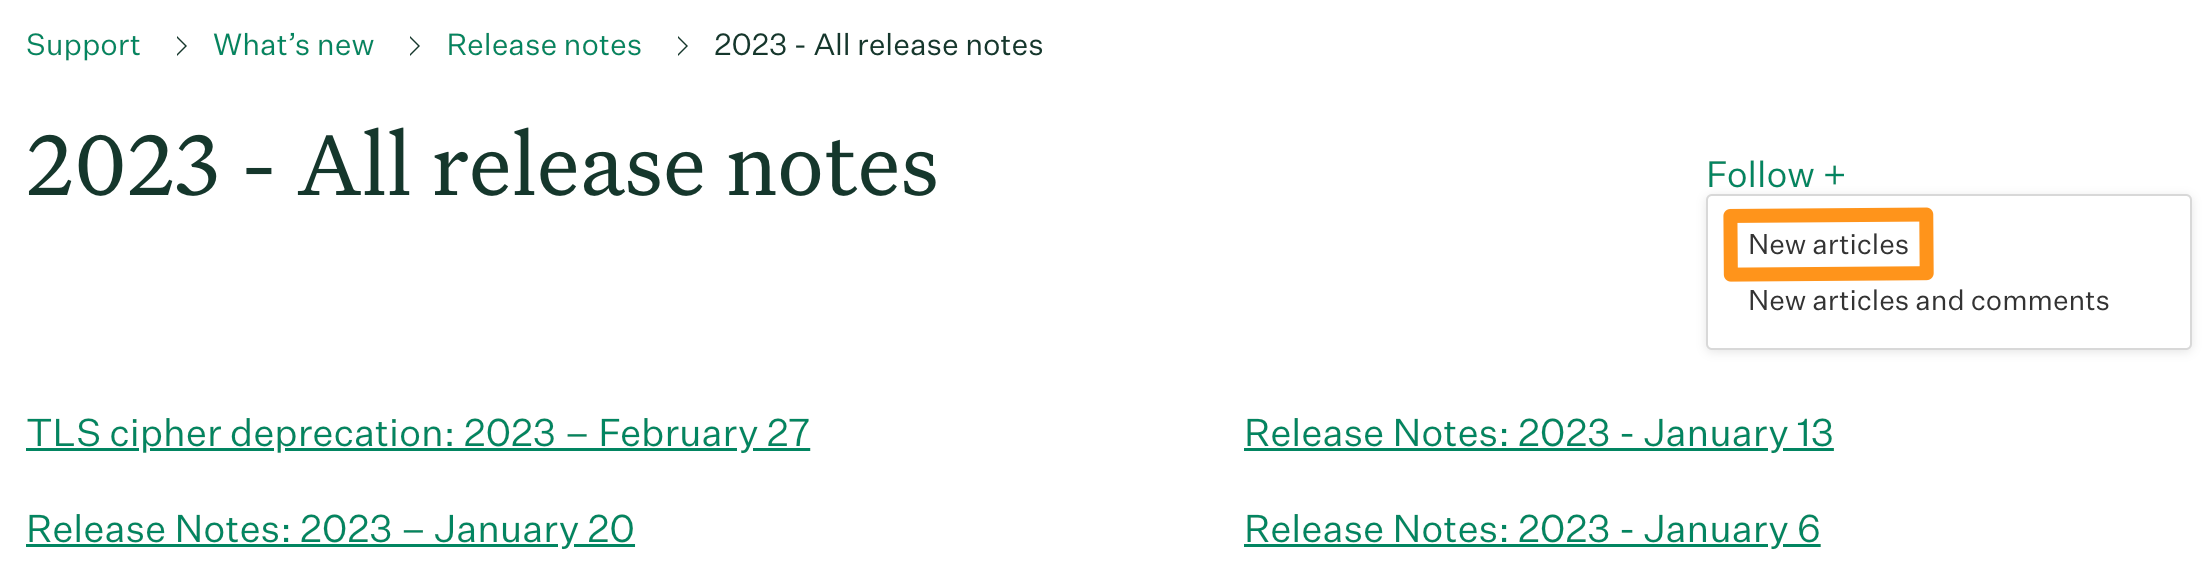 2023_-_All_release_notes_follow__Greenhouse_Support.png